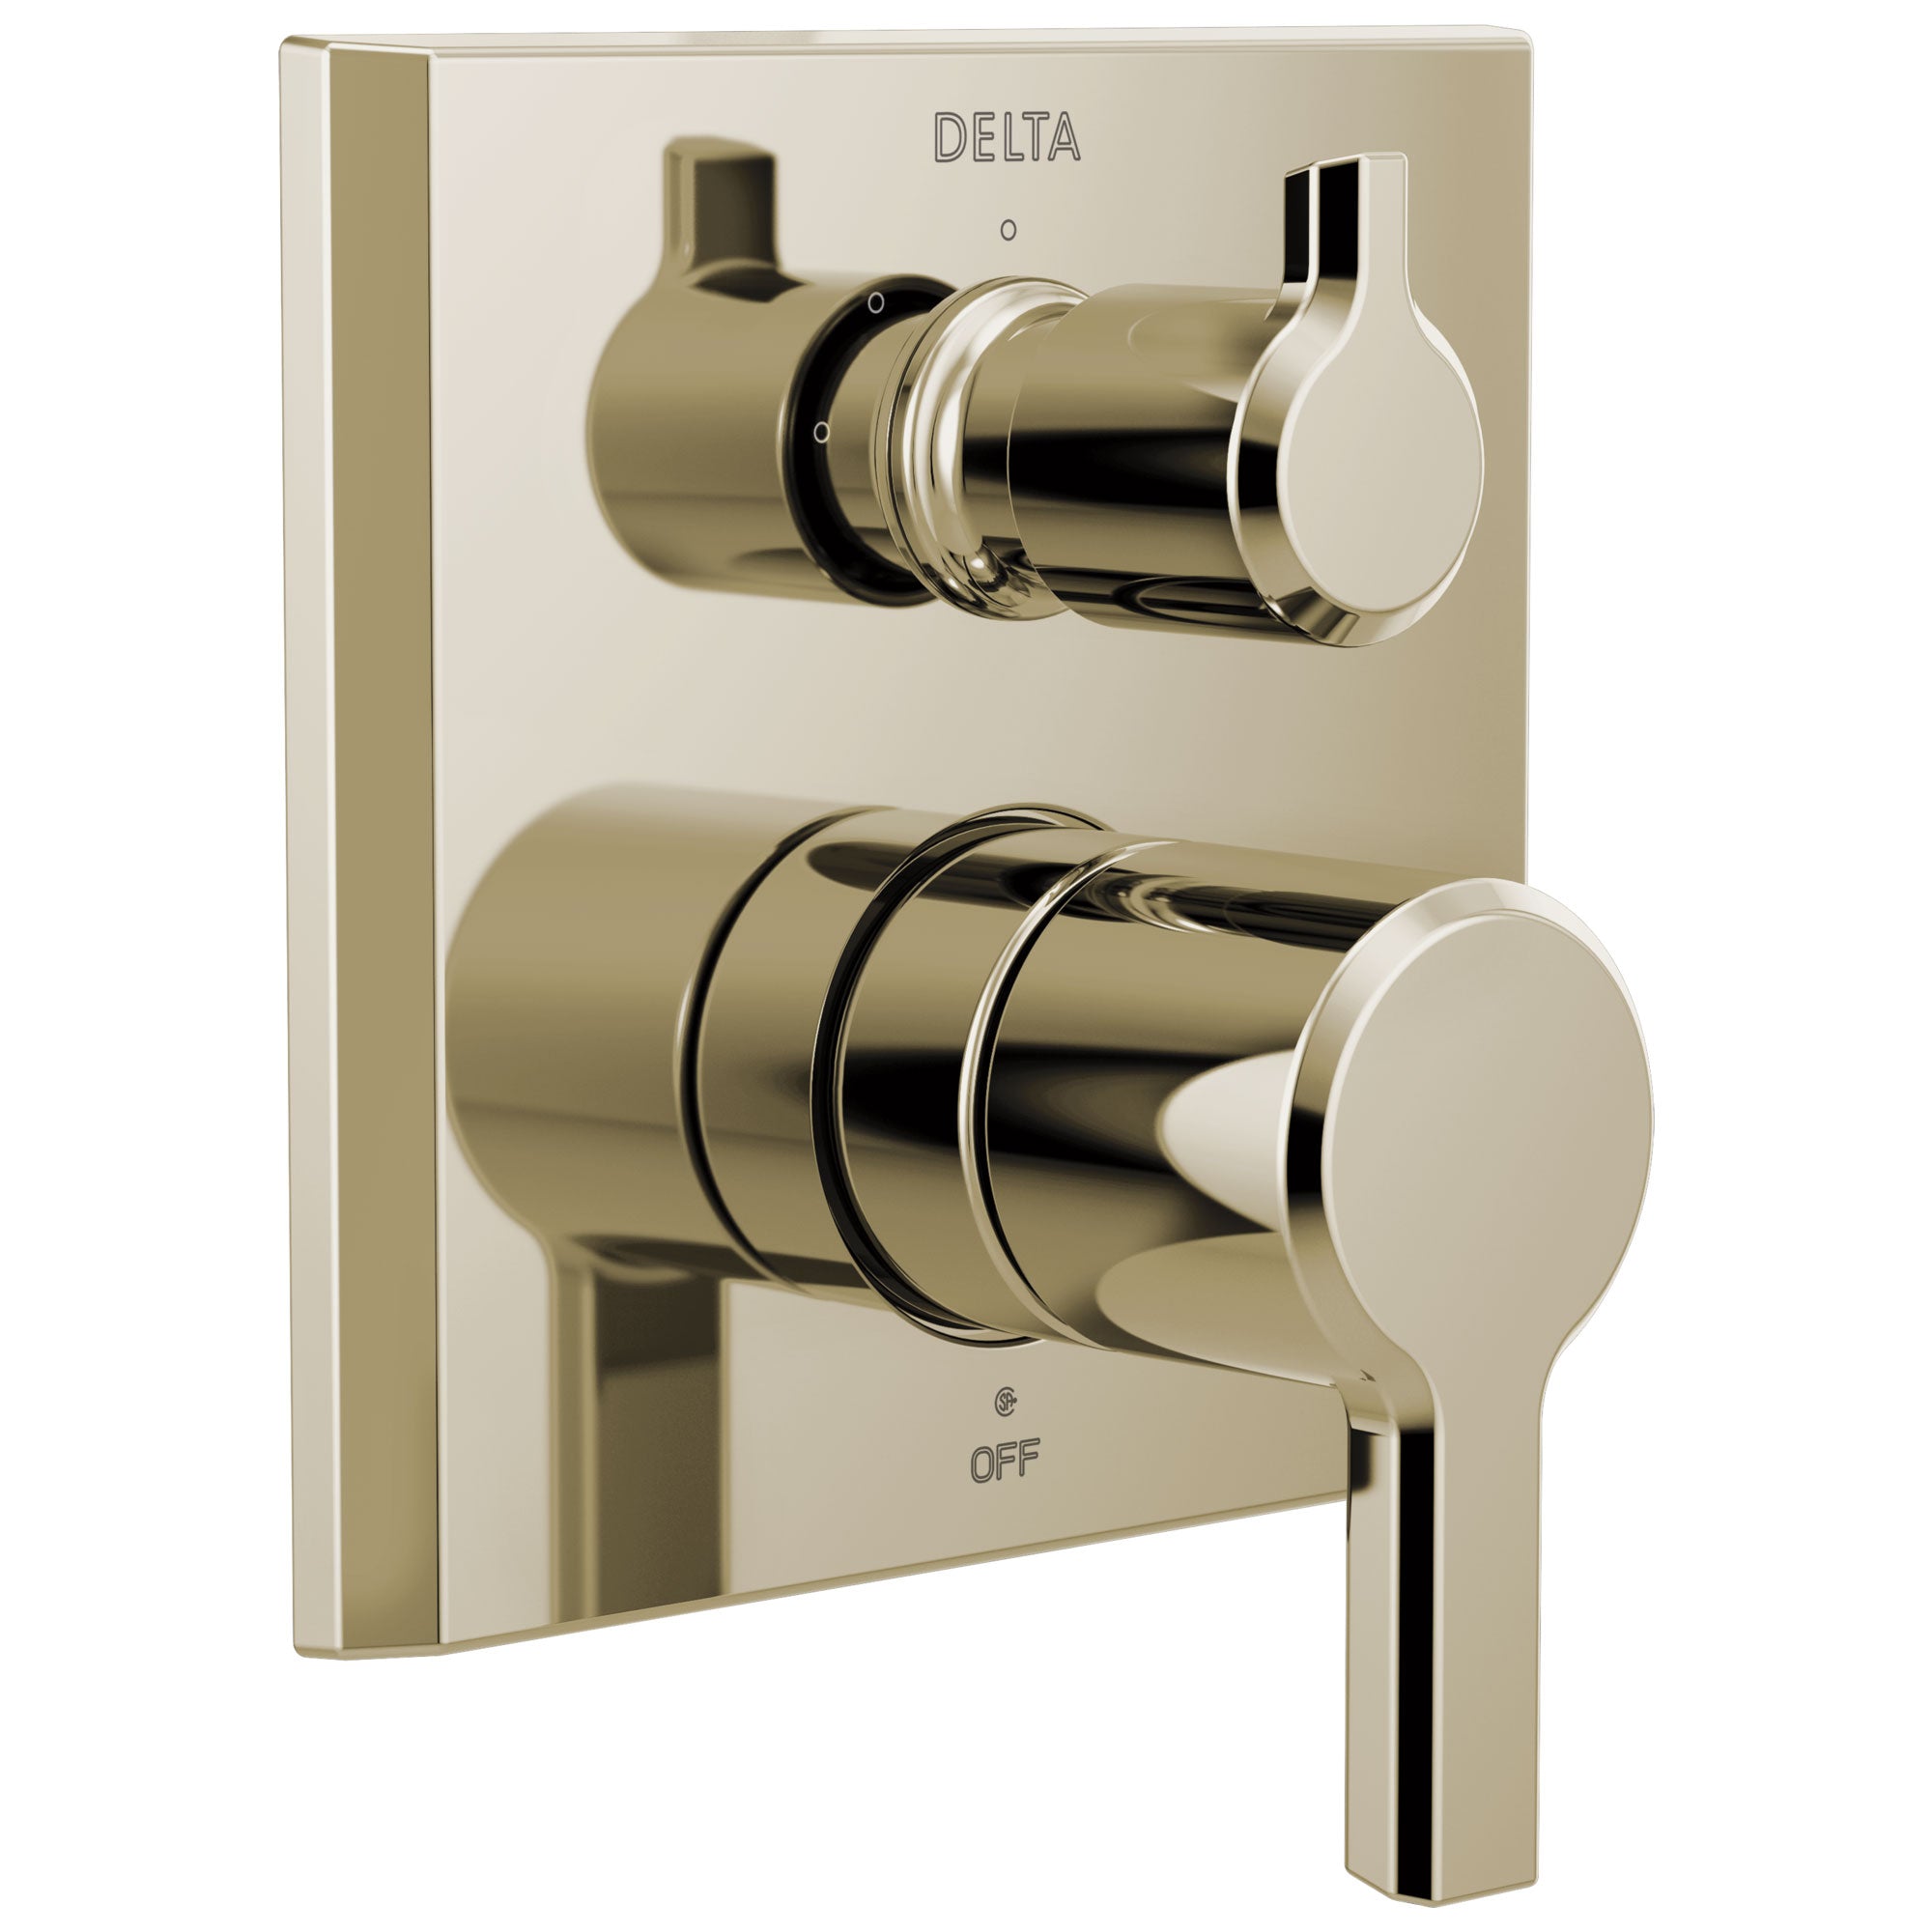 Delta Pivotal Polished Nickel Finish 14 Series Shower Faucet System Control with 3-Setting Integrated Diverter Includes Valve and Handles D3189V